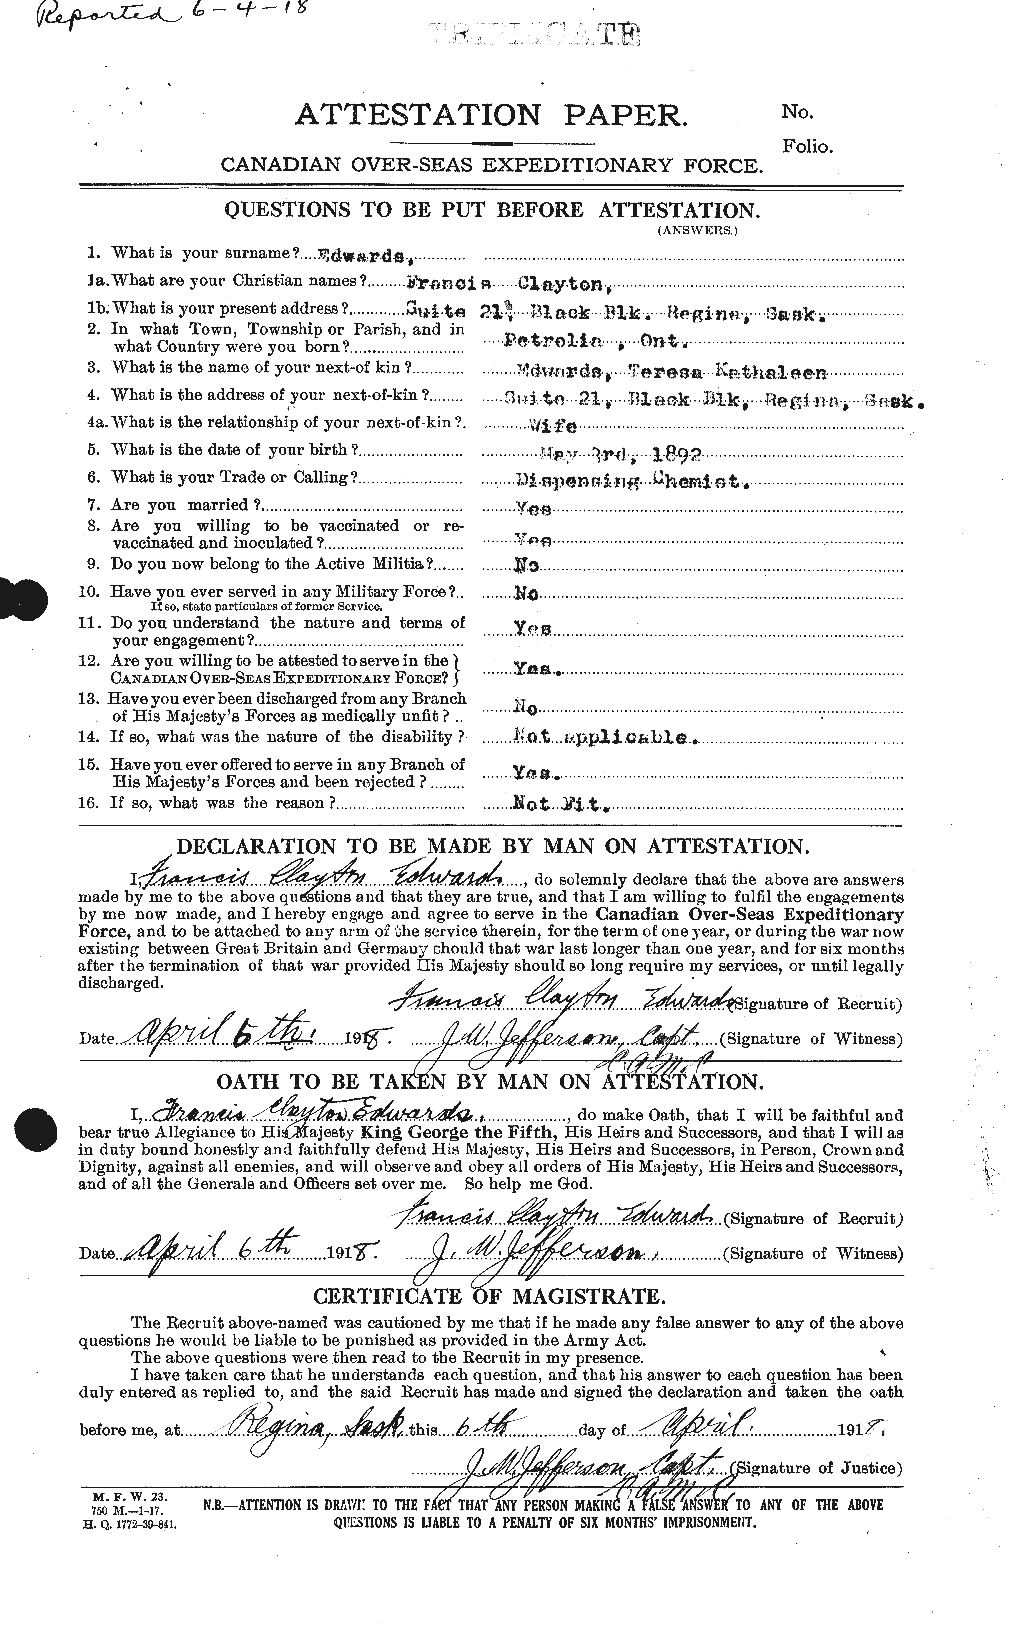 Personnel Records of the First World War - CEF 309033a